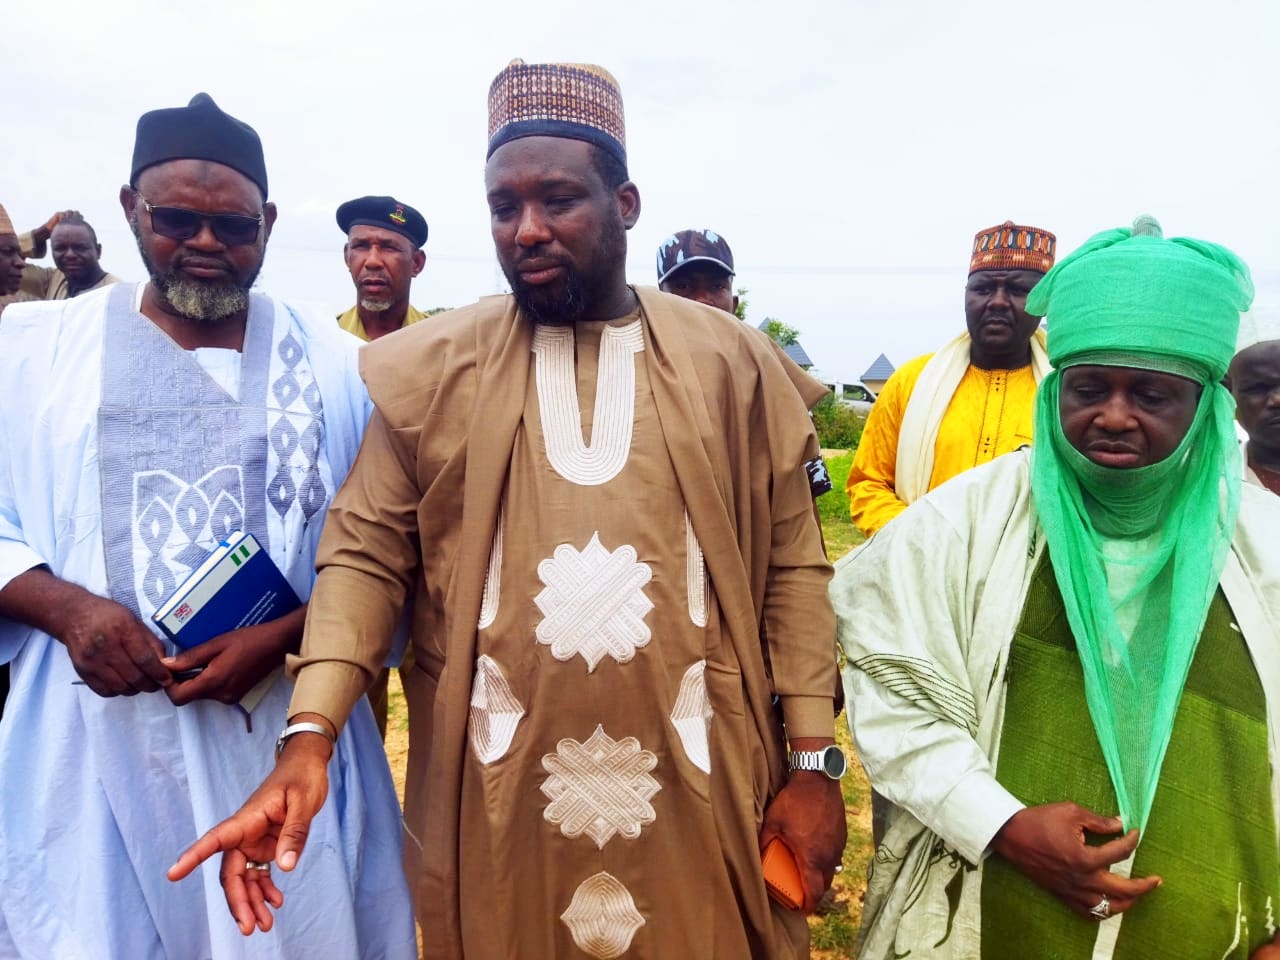 From left: The Jigawa Hisbah Commander, Ibrahim Dahiru, the Local Government Chairman, Muhammad Muktar, and the Representative of the Emir of Kazaure, Umar Tafida, during the burning exercise in Kazaure on 18, August (Photo credit: Premium Times)